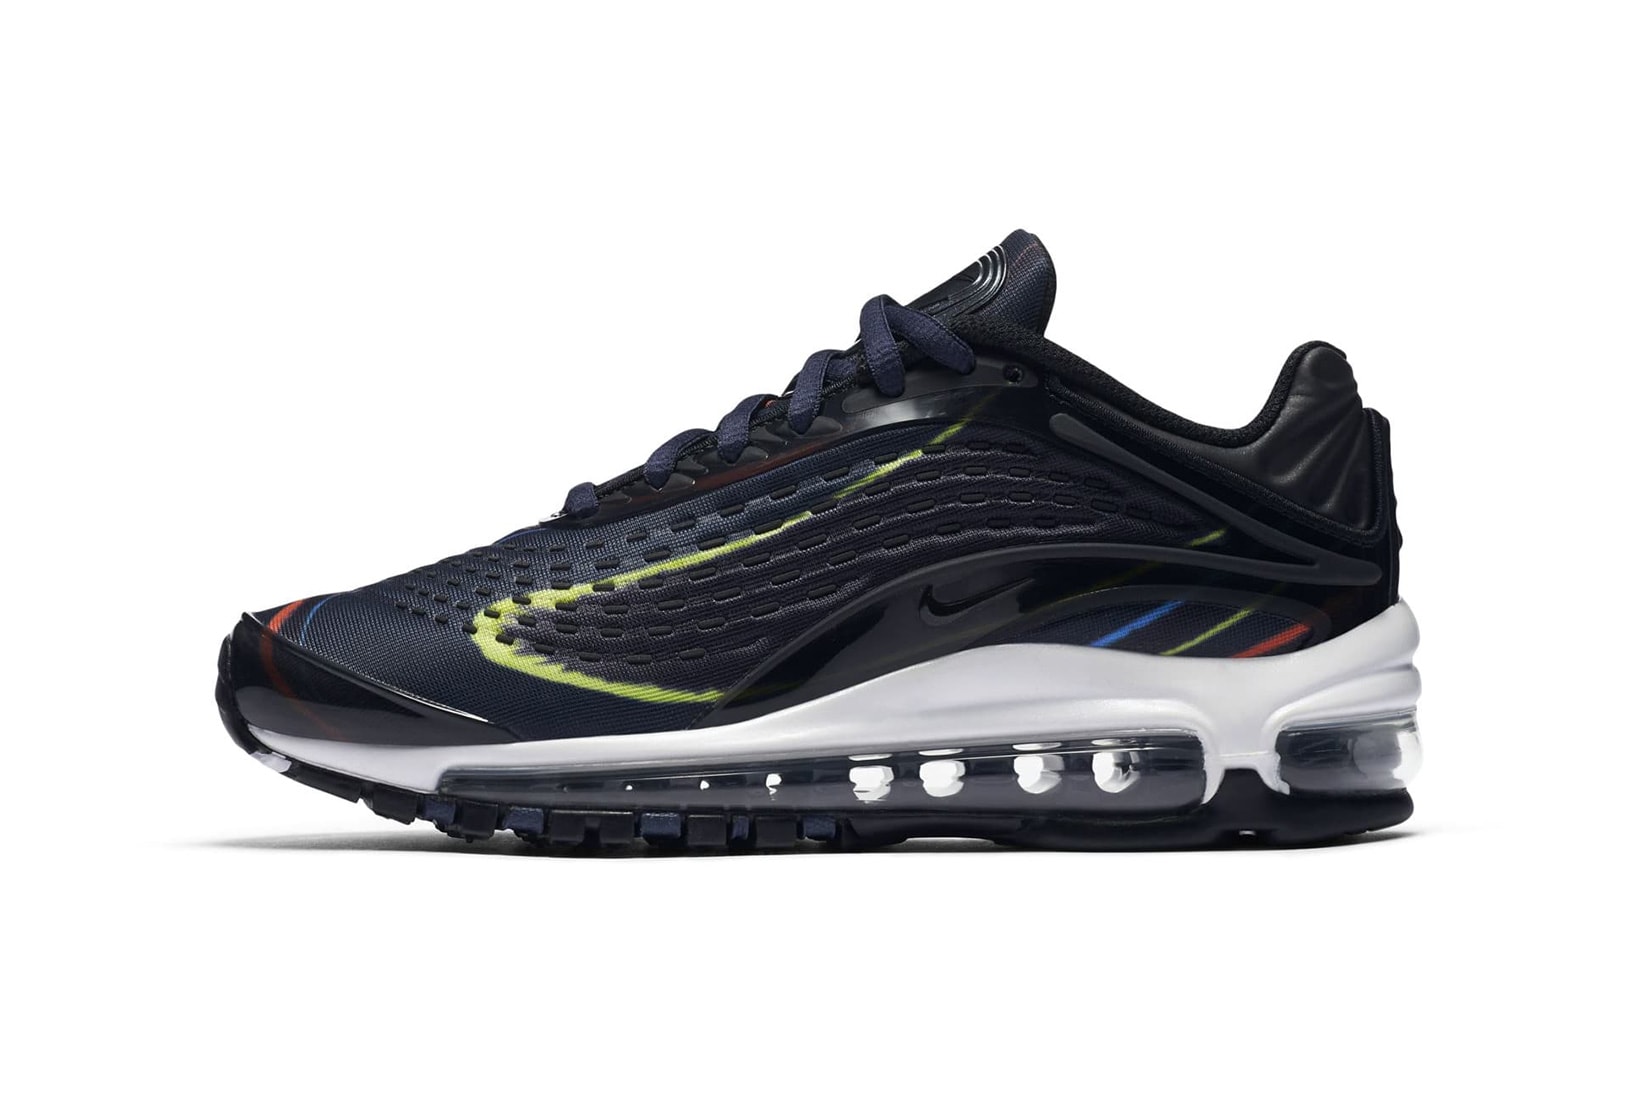 Nike Air Max Deluxe white black grey red midnight navy volt blue red nike sportswear 2018 footwear